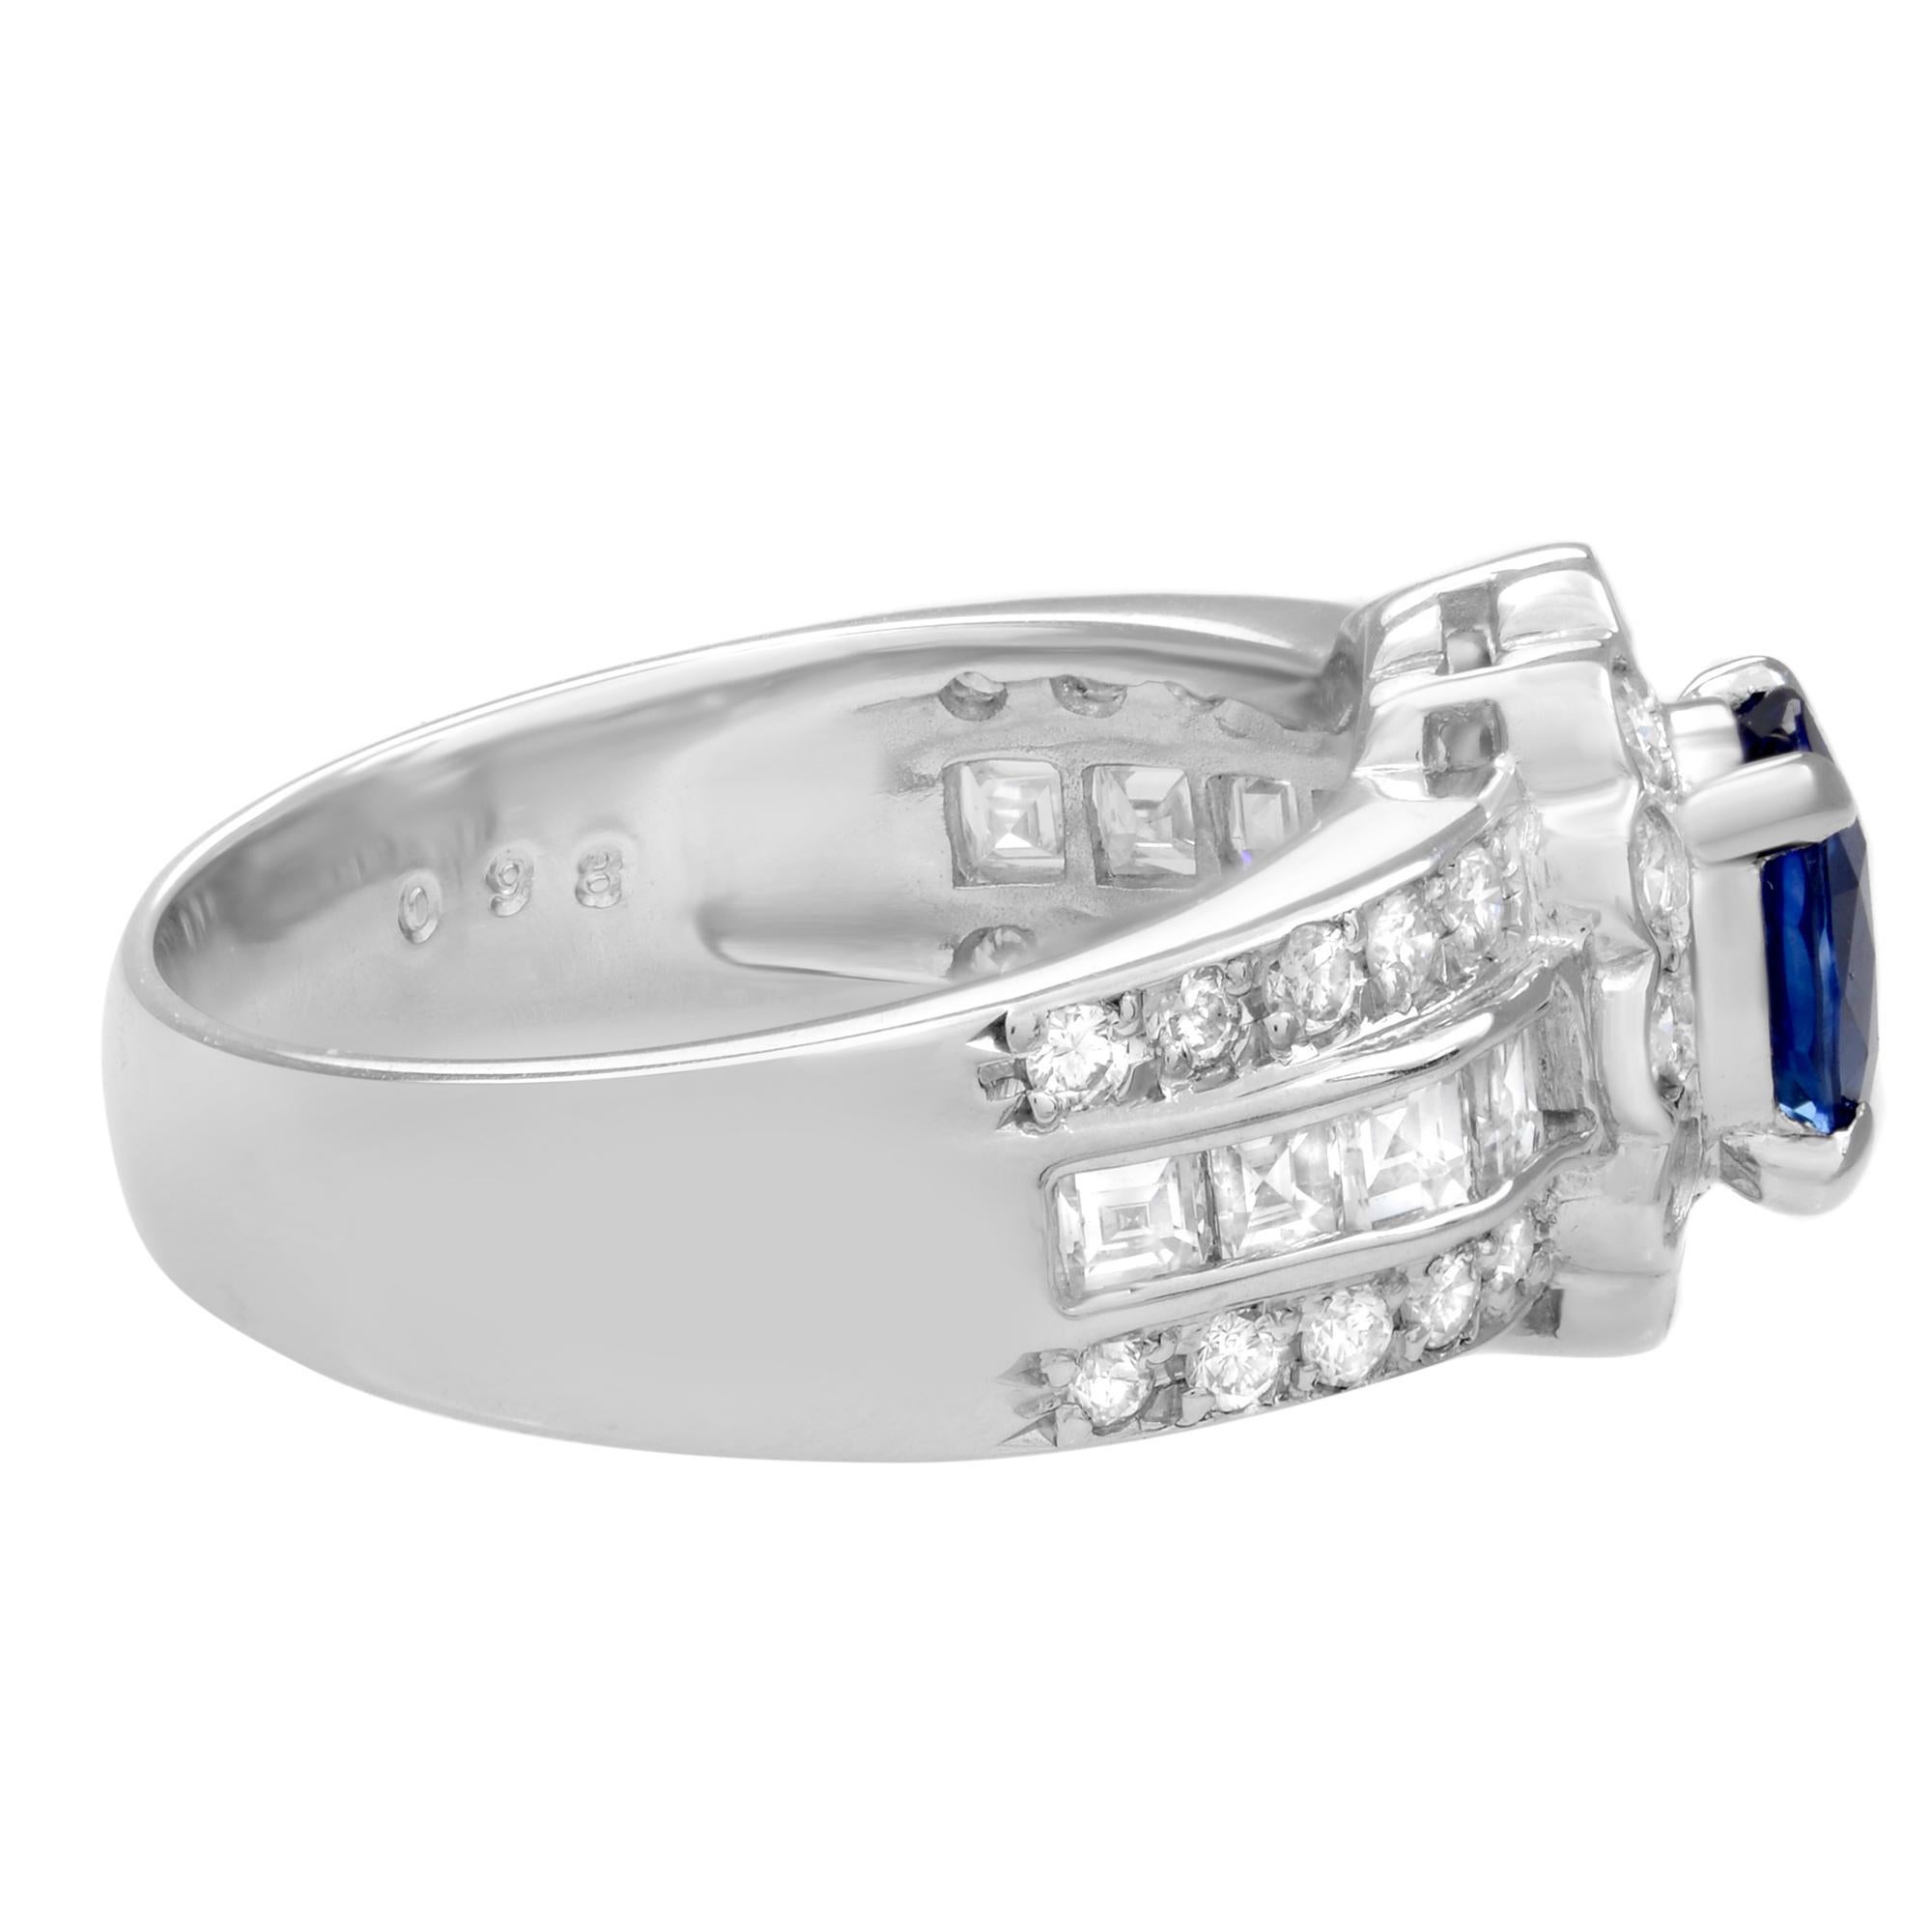 This beautiful cocktail ring features a center oval cut Blue Sapphire weighing 1.02cts surrounded by round brilliant cut and princess cut diamonds alternating between pave set and channel set in each row. Crafted in highly polished platinum with